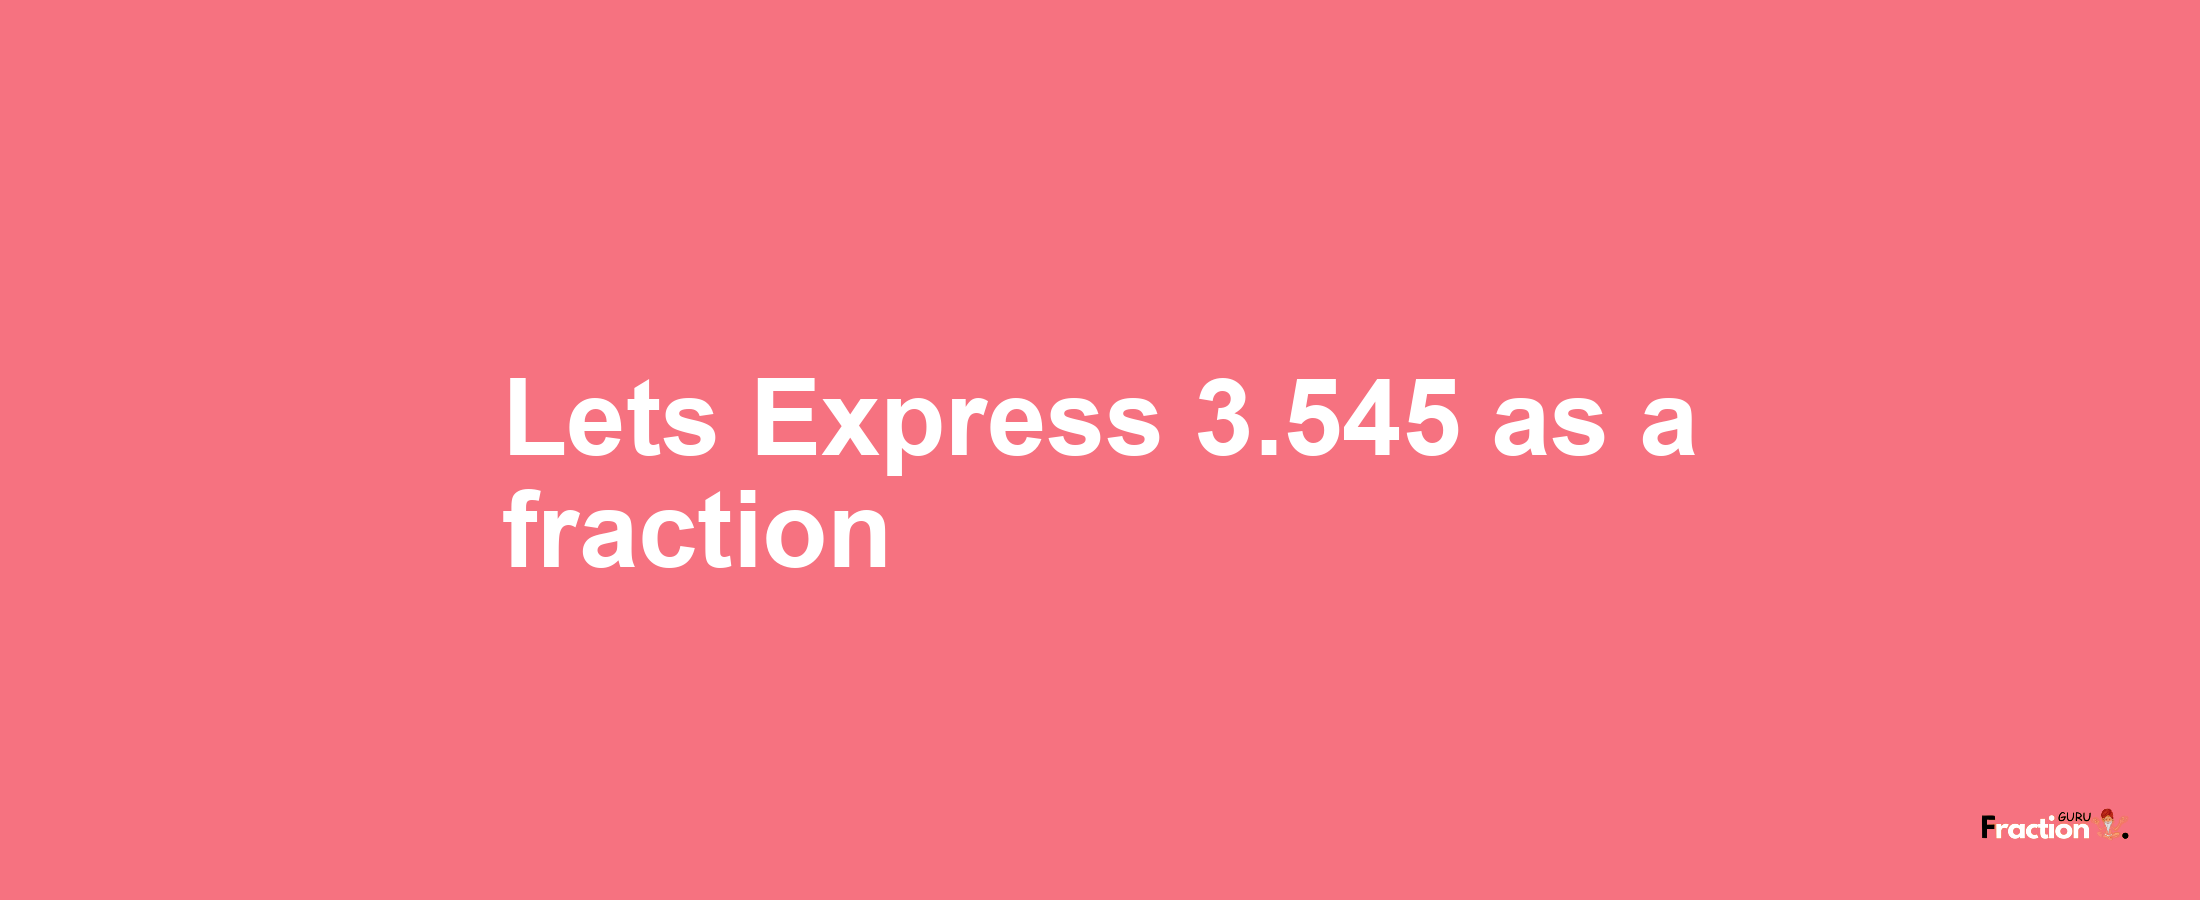 Lets Express 3.545 as afraction